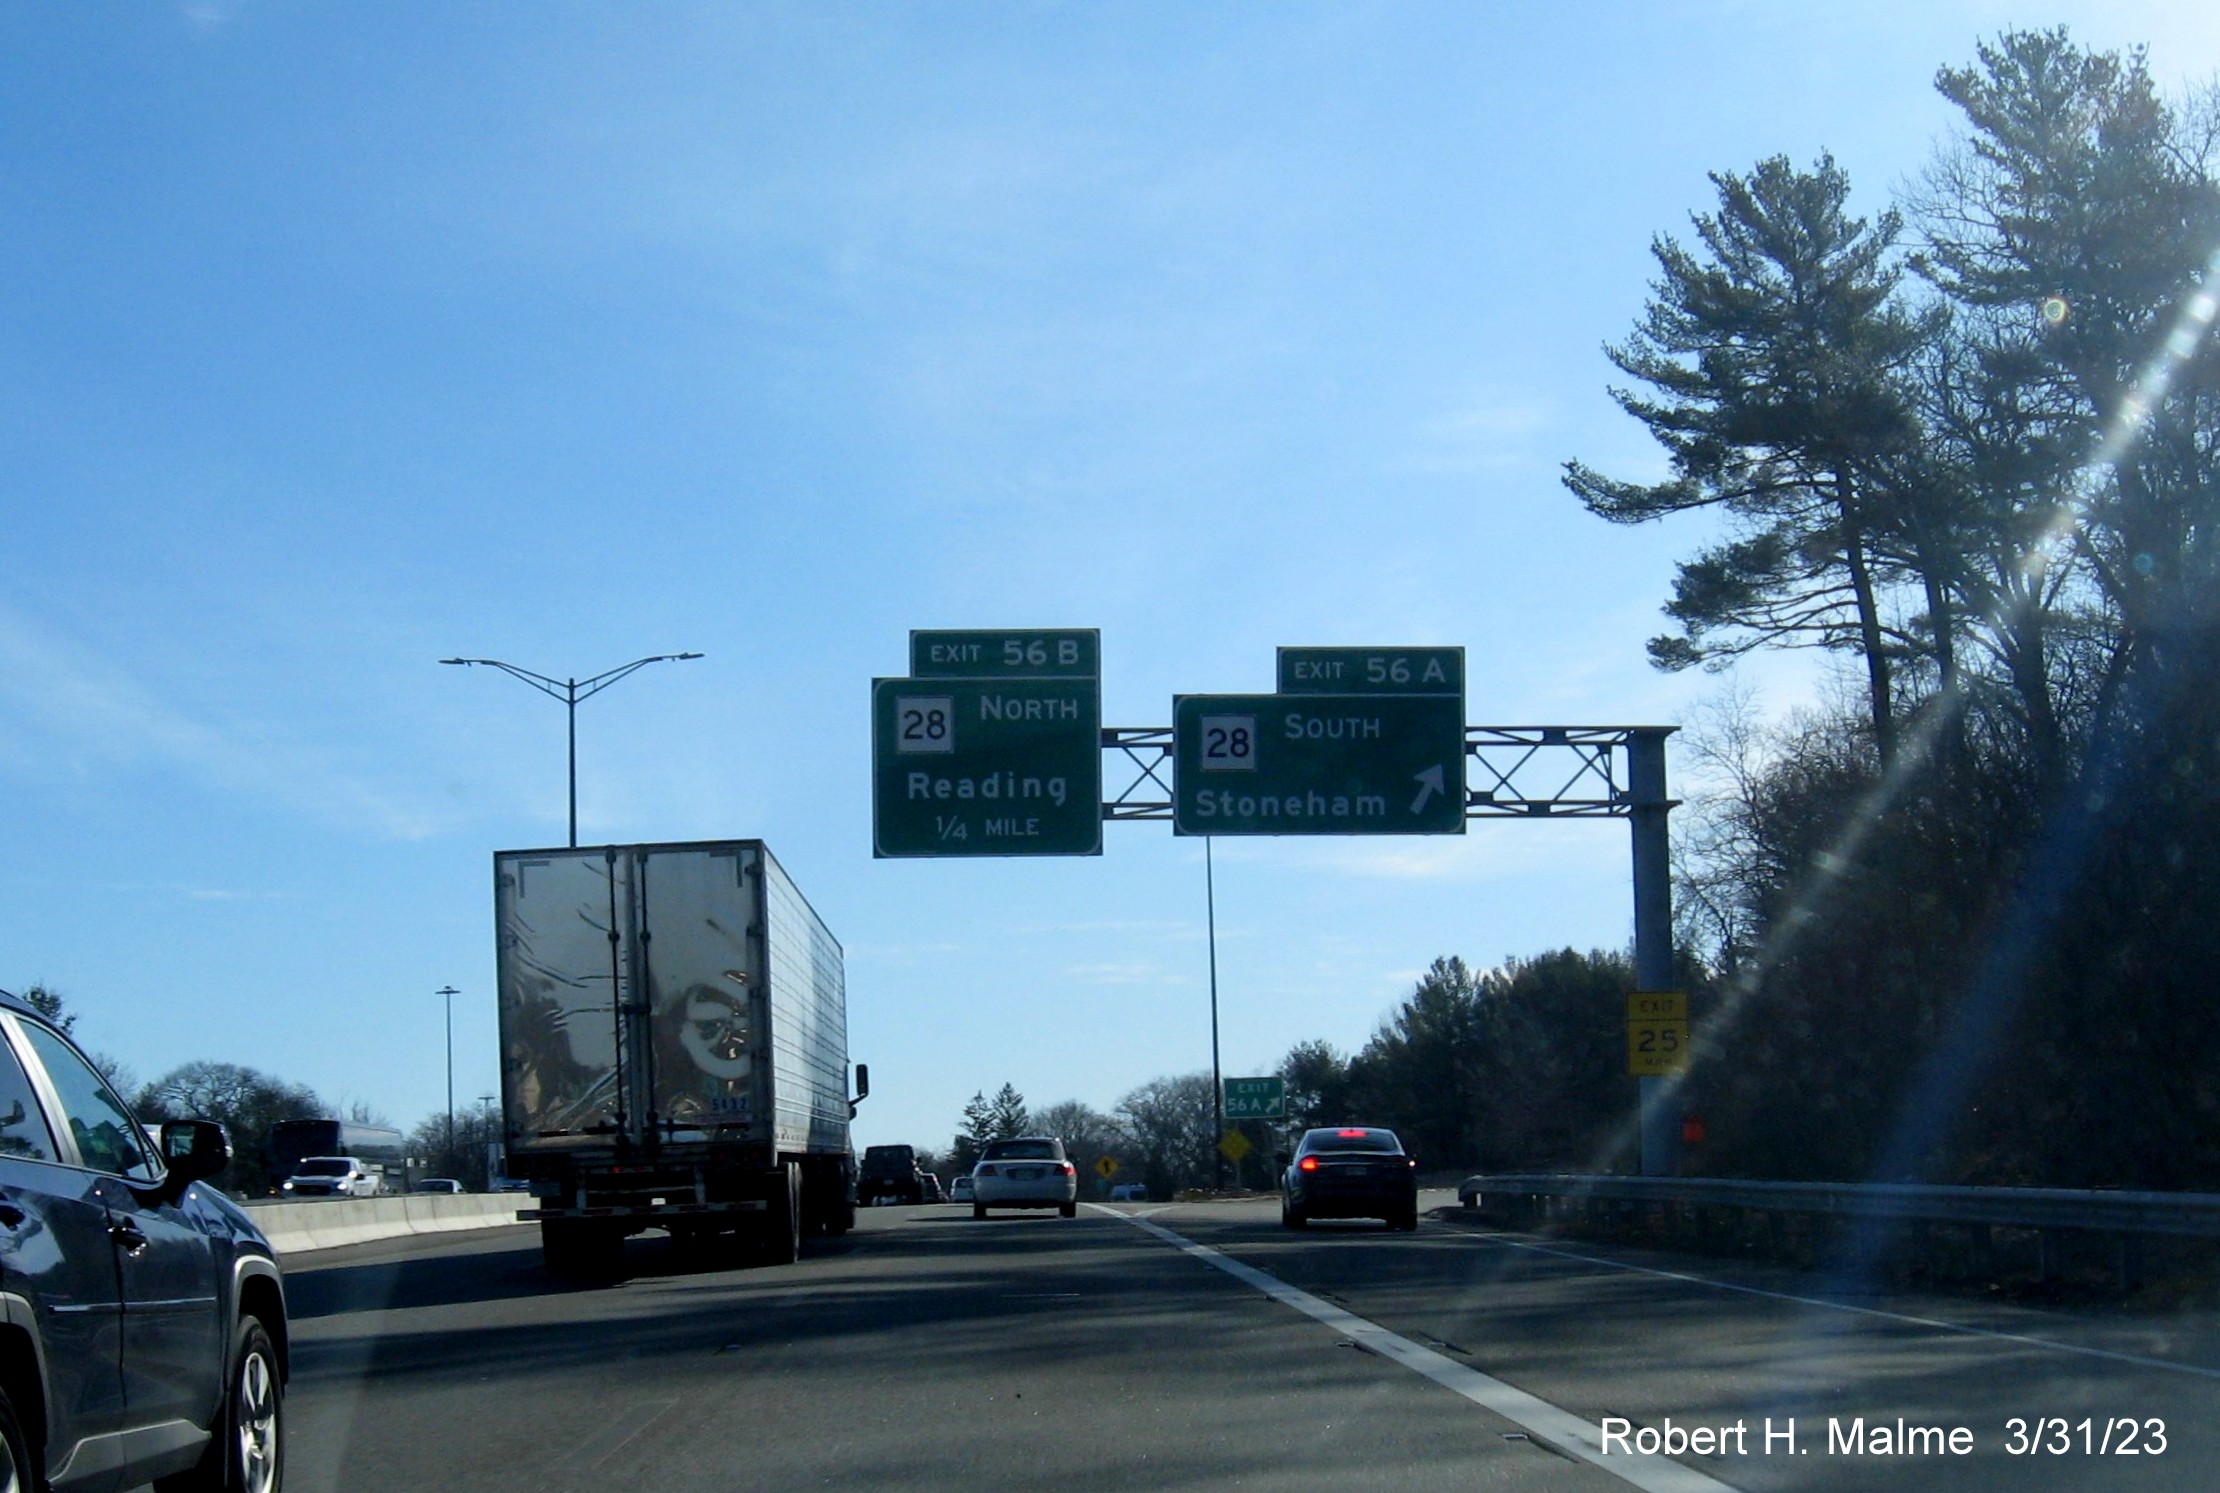 Image of recently updated overhead signage at the exit ramp to MA 28 South on I-95/MA 128 in Reading, March 2023